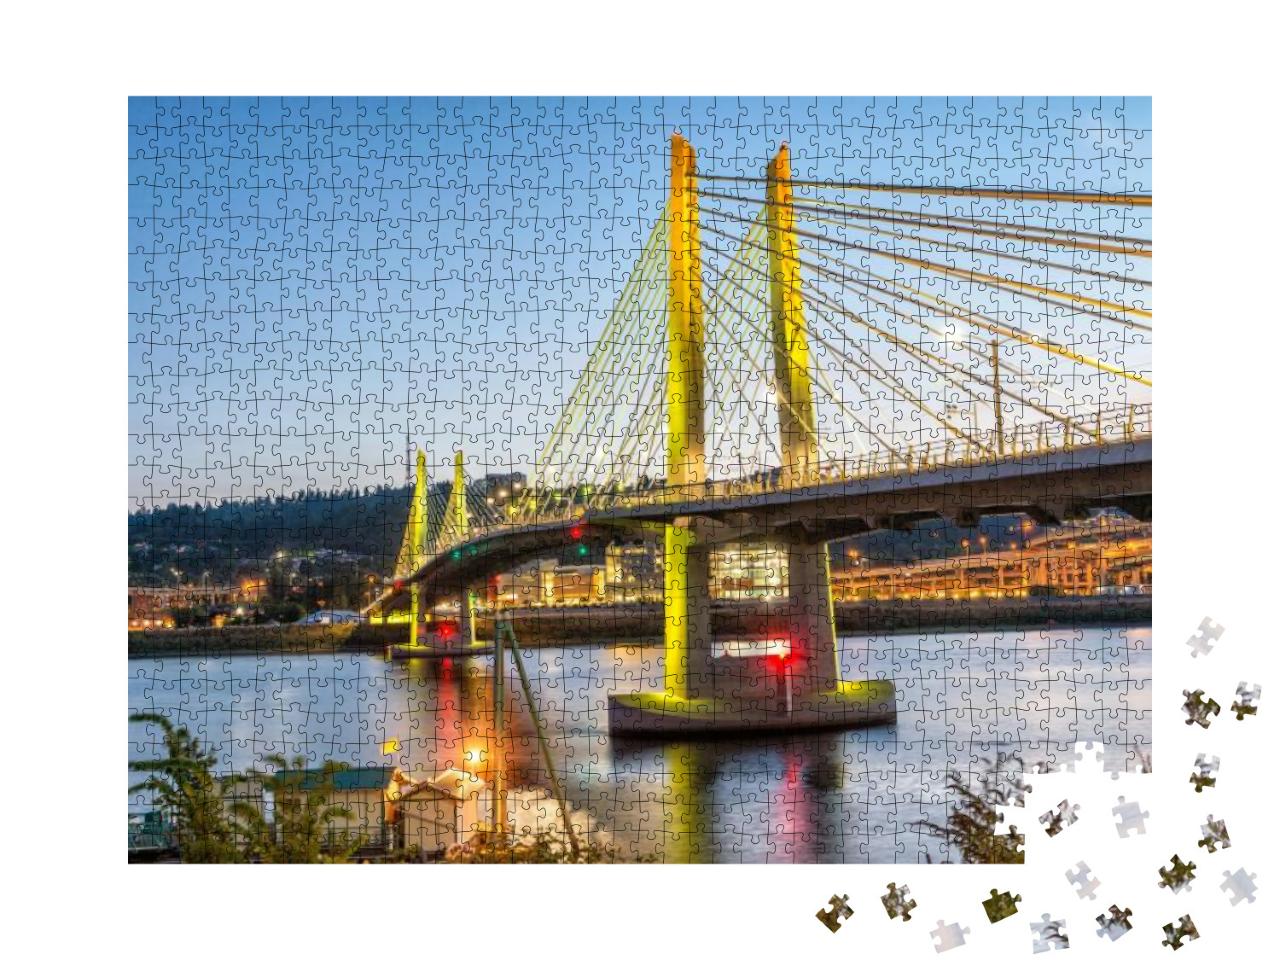 Tilikum Crossing At Night in Portland, Or... Jigsaw Puzzle with 1000 pieces